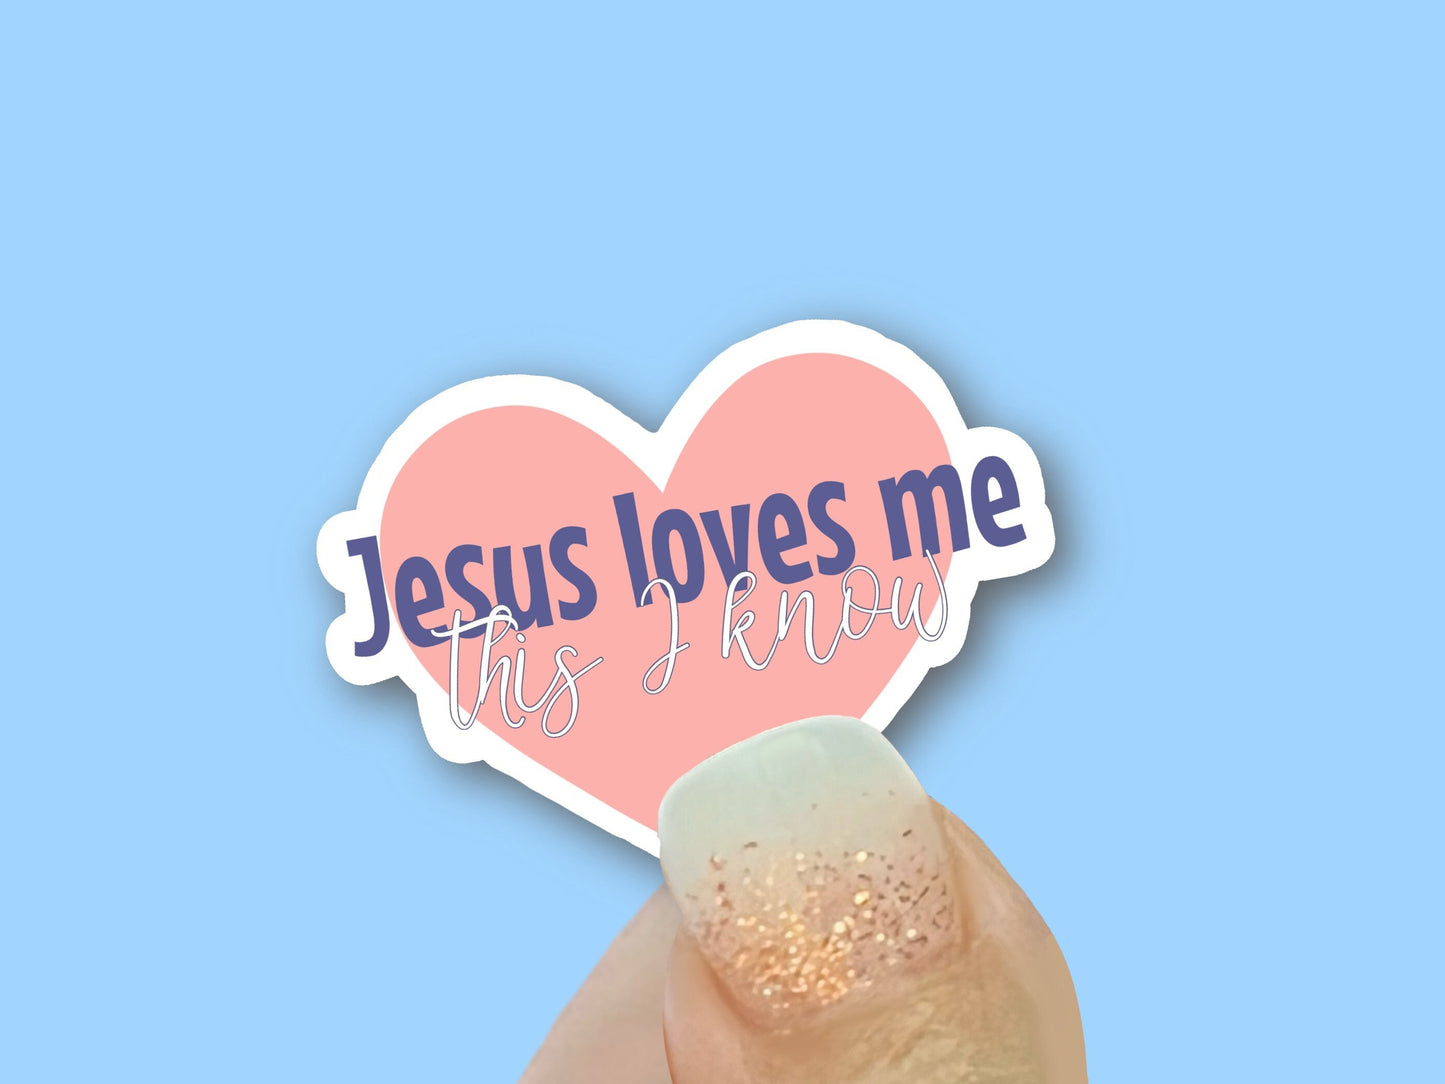 Jesus Loves Me this I know - Christian Faith UV/ Waterproof Vinyl Sticker/ Decal- Choice of Size, Single or Bulk qty